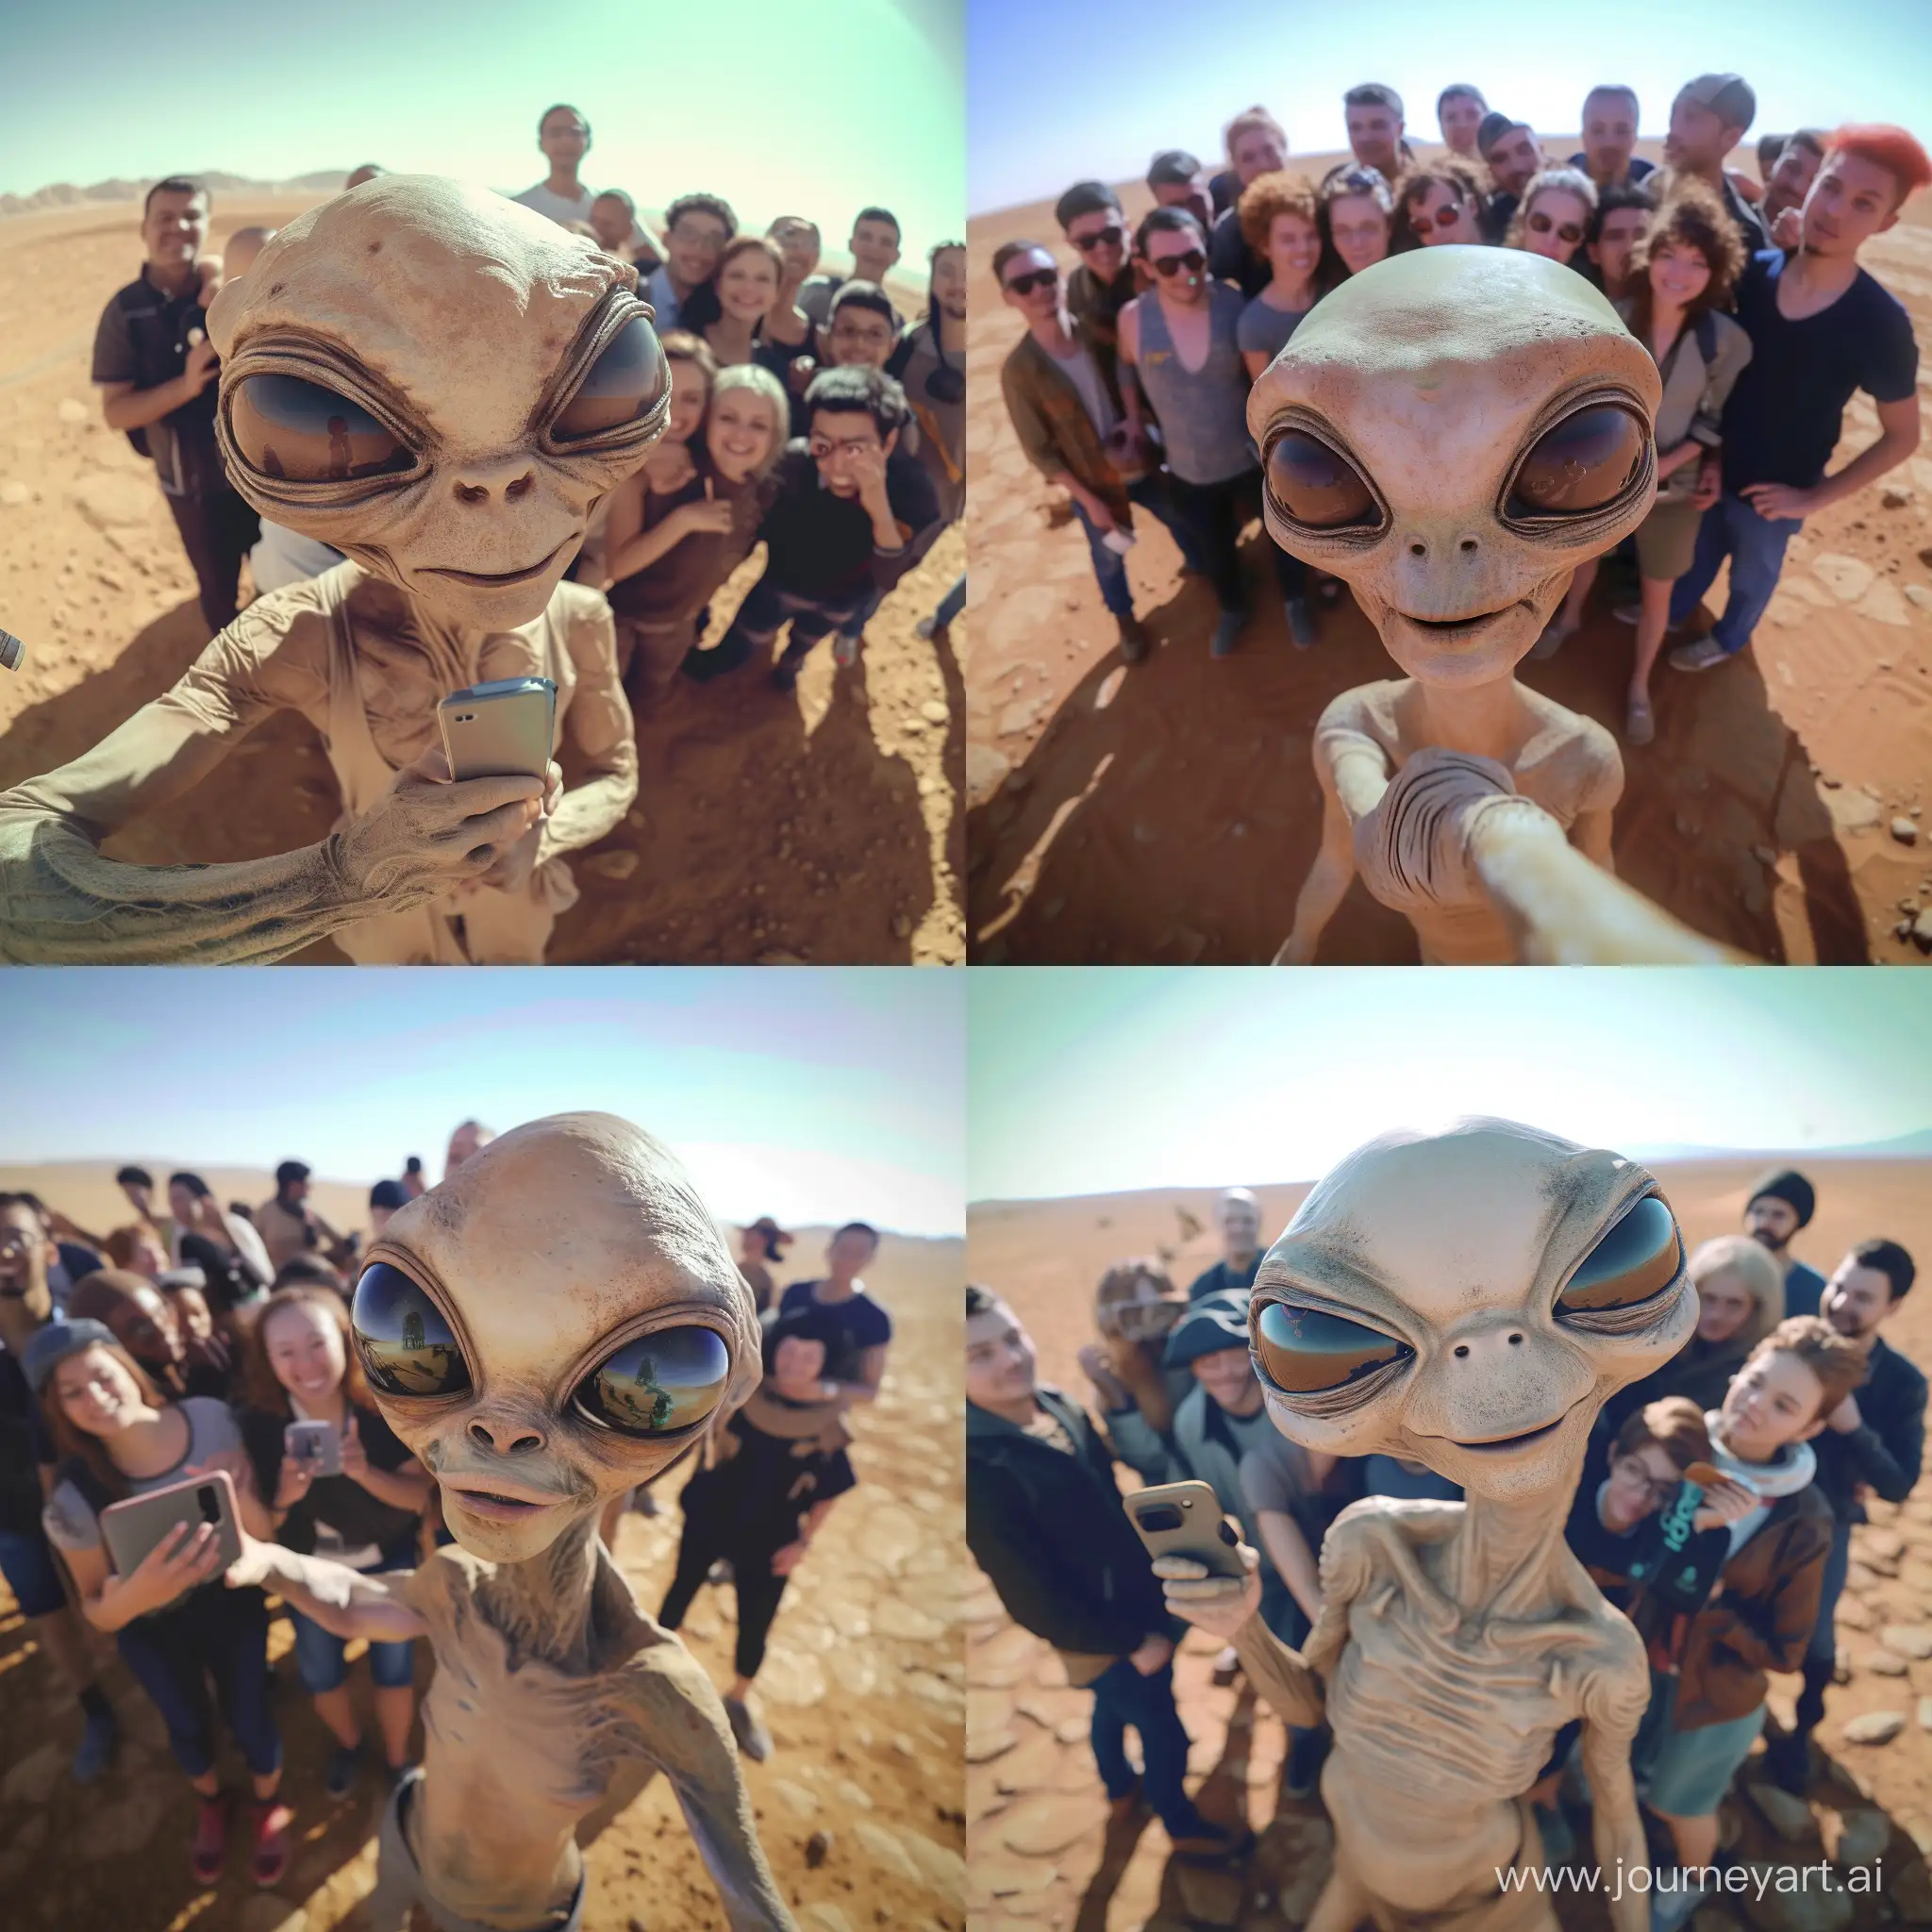 A digital photograph of a friendly extraterrestrial character taking a selfie with a closely huddled group of humans in a Mars setting. The extraterrestrial has a large head with huge, expressive eyes, and pale beige skin, wearing simple, earth-toned clothing. The humans are in close proximity, wearing a variety of modern casual clothing, appearing as a diverse group. They all seem to be enjoying the moment, with smiling faces. The background shows a clear blue sky above the sandy Mars surface, with the image captured in a wide-angle perspective that slightly warps the edges, adding a dynamic feel to the scene.